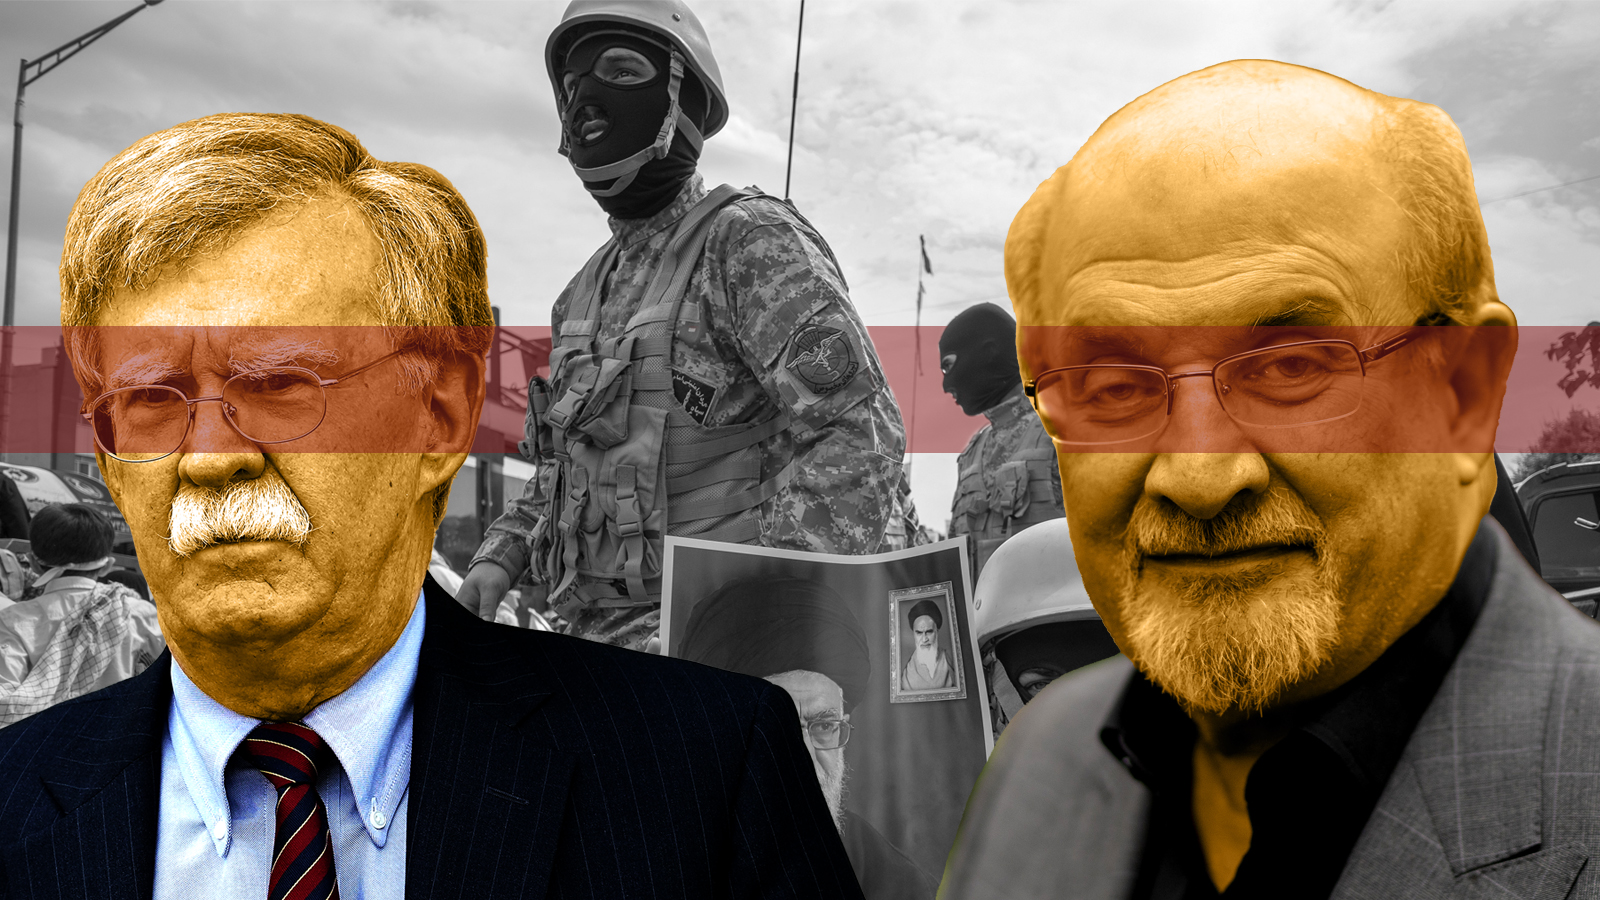 John Bolton, Salman Rushdie, and IRG Soldiers